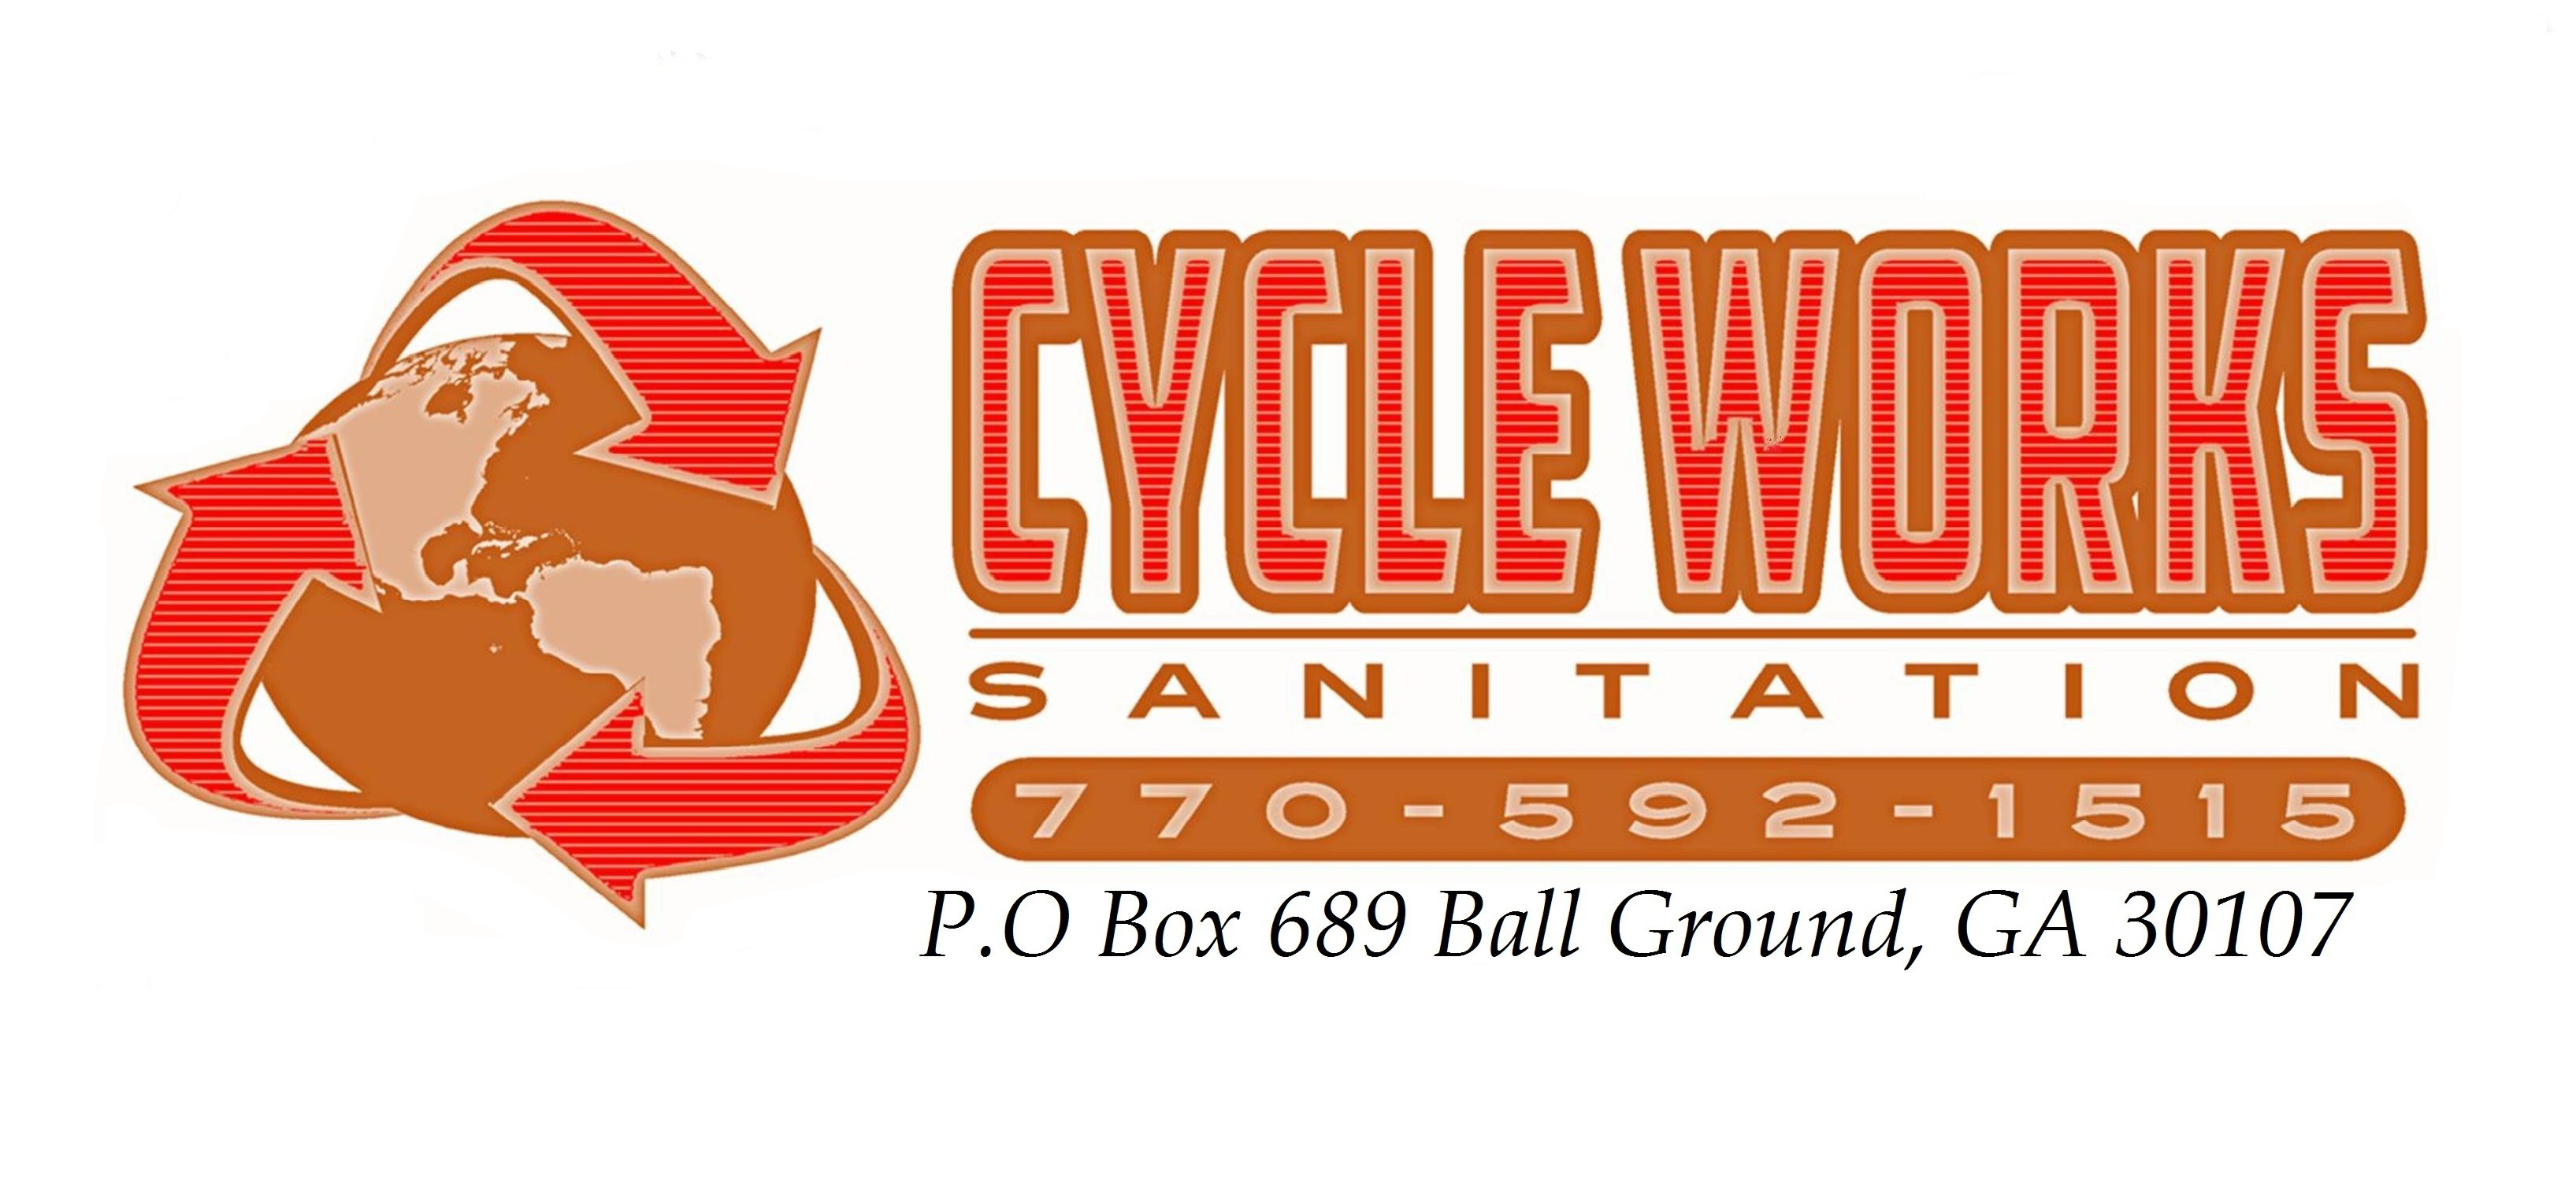 Cycle Works Sanitation & Recycling